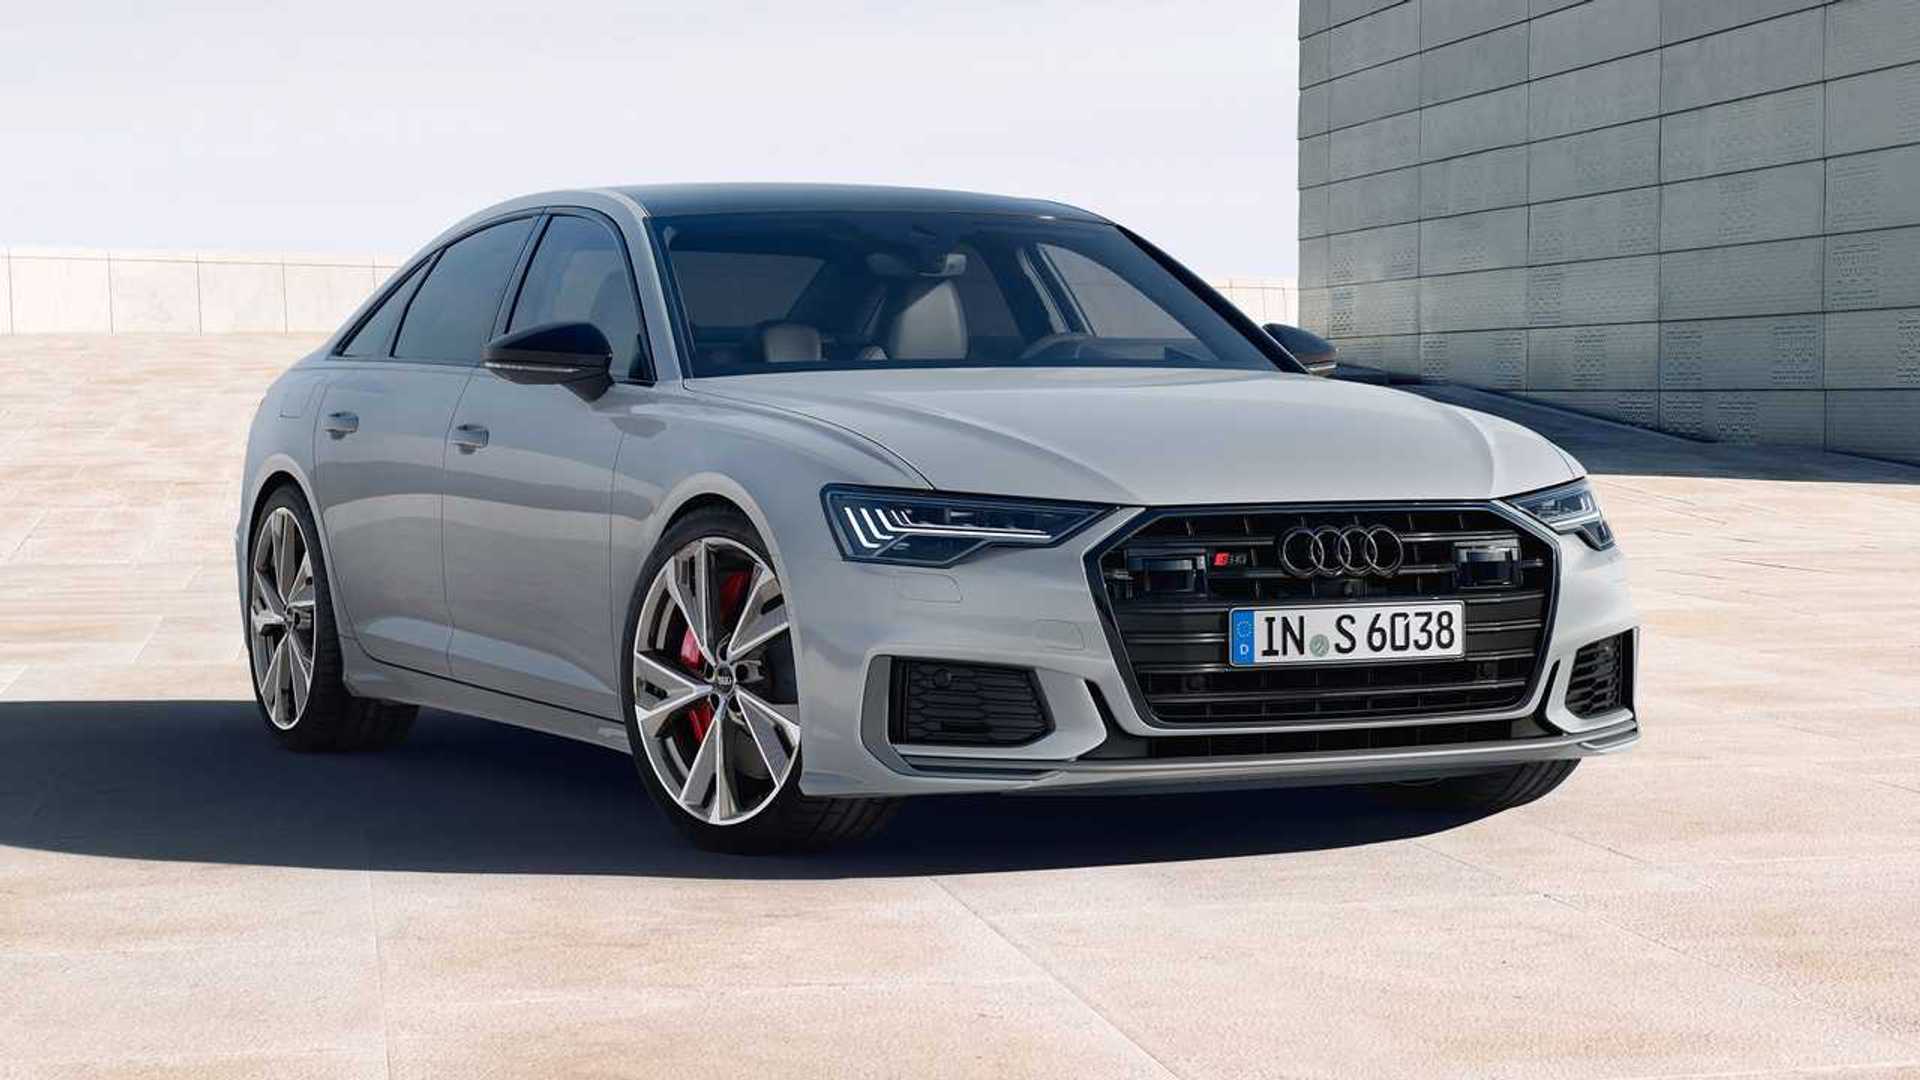 2023 Audi S6 and S7 Design Edition Arrives In Style With Unique Body Color